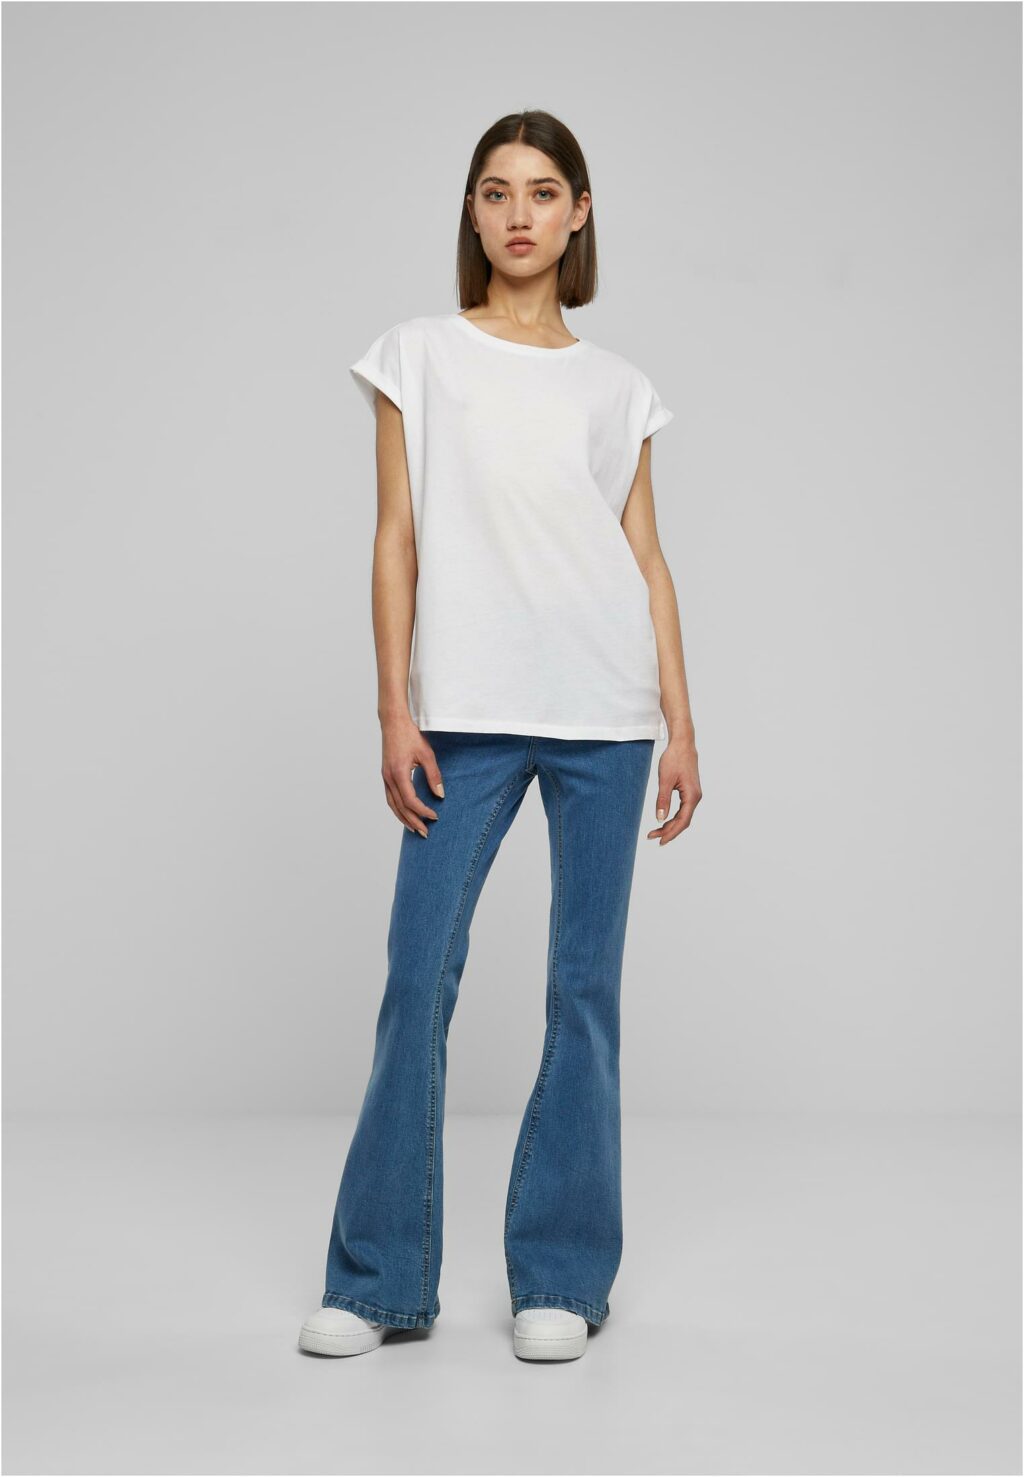 Urban Classics Ladies Extended Shoulder Tee white TB771